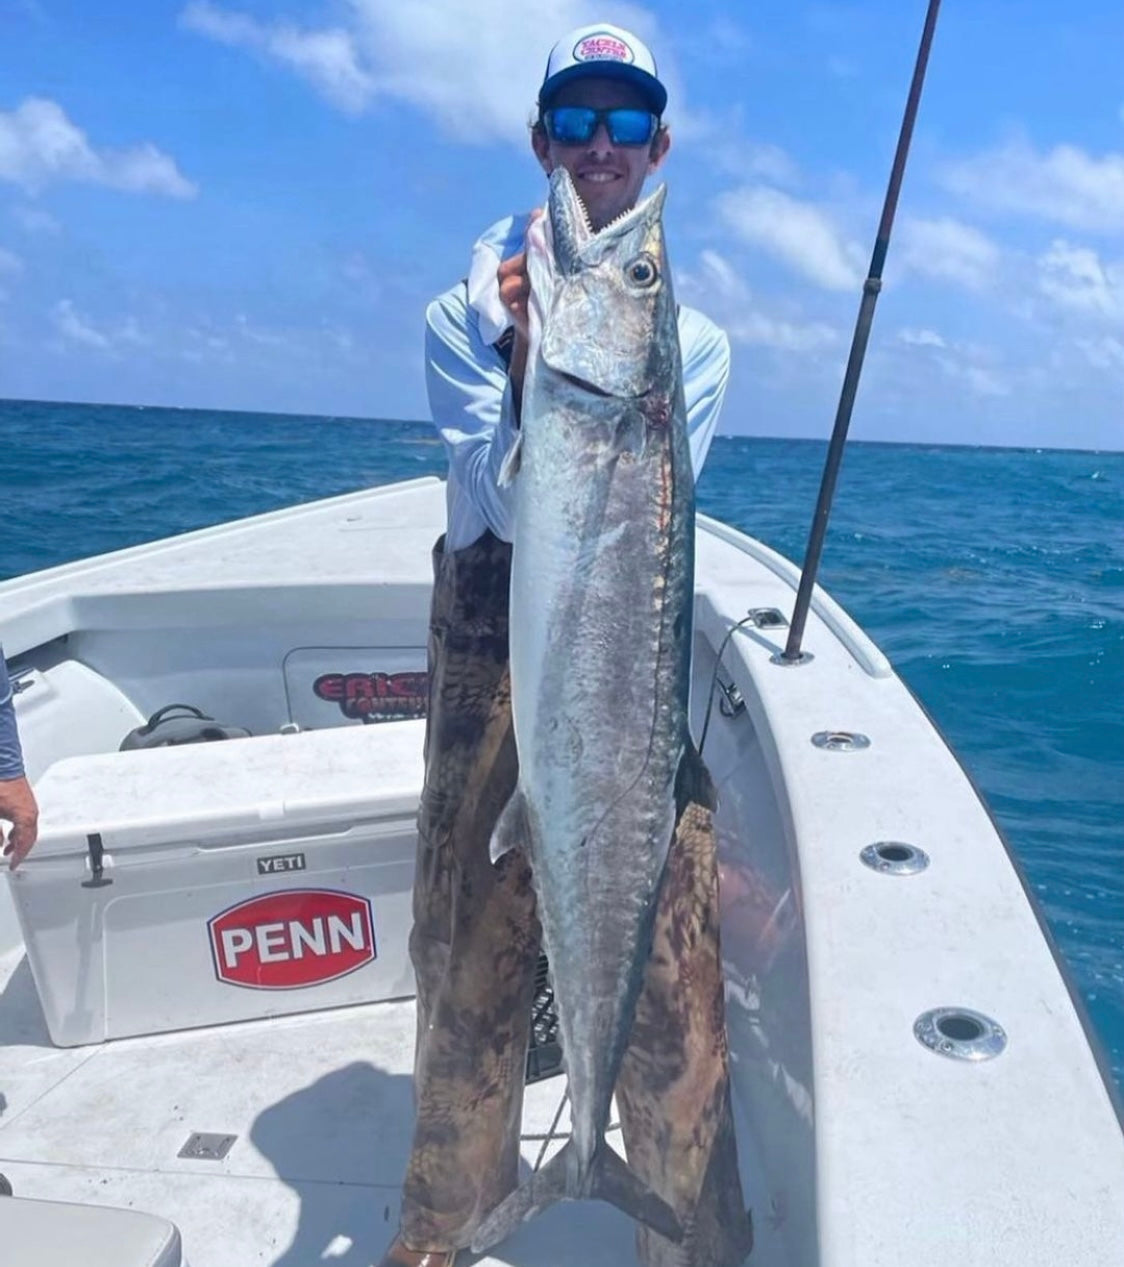 When trying to pursue toothy fish or even billfish these high quality titanium leaders are the best. Approximately 36 inches long, using a high quality stainless steel crane swivel